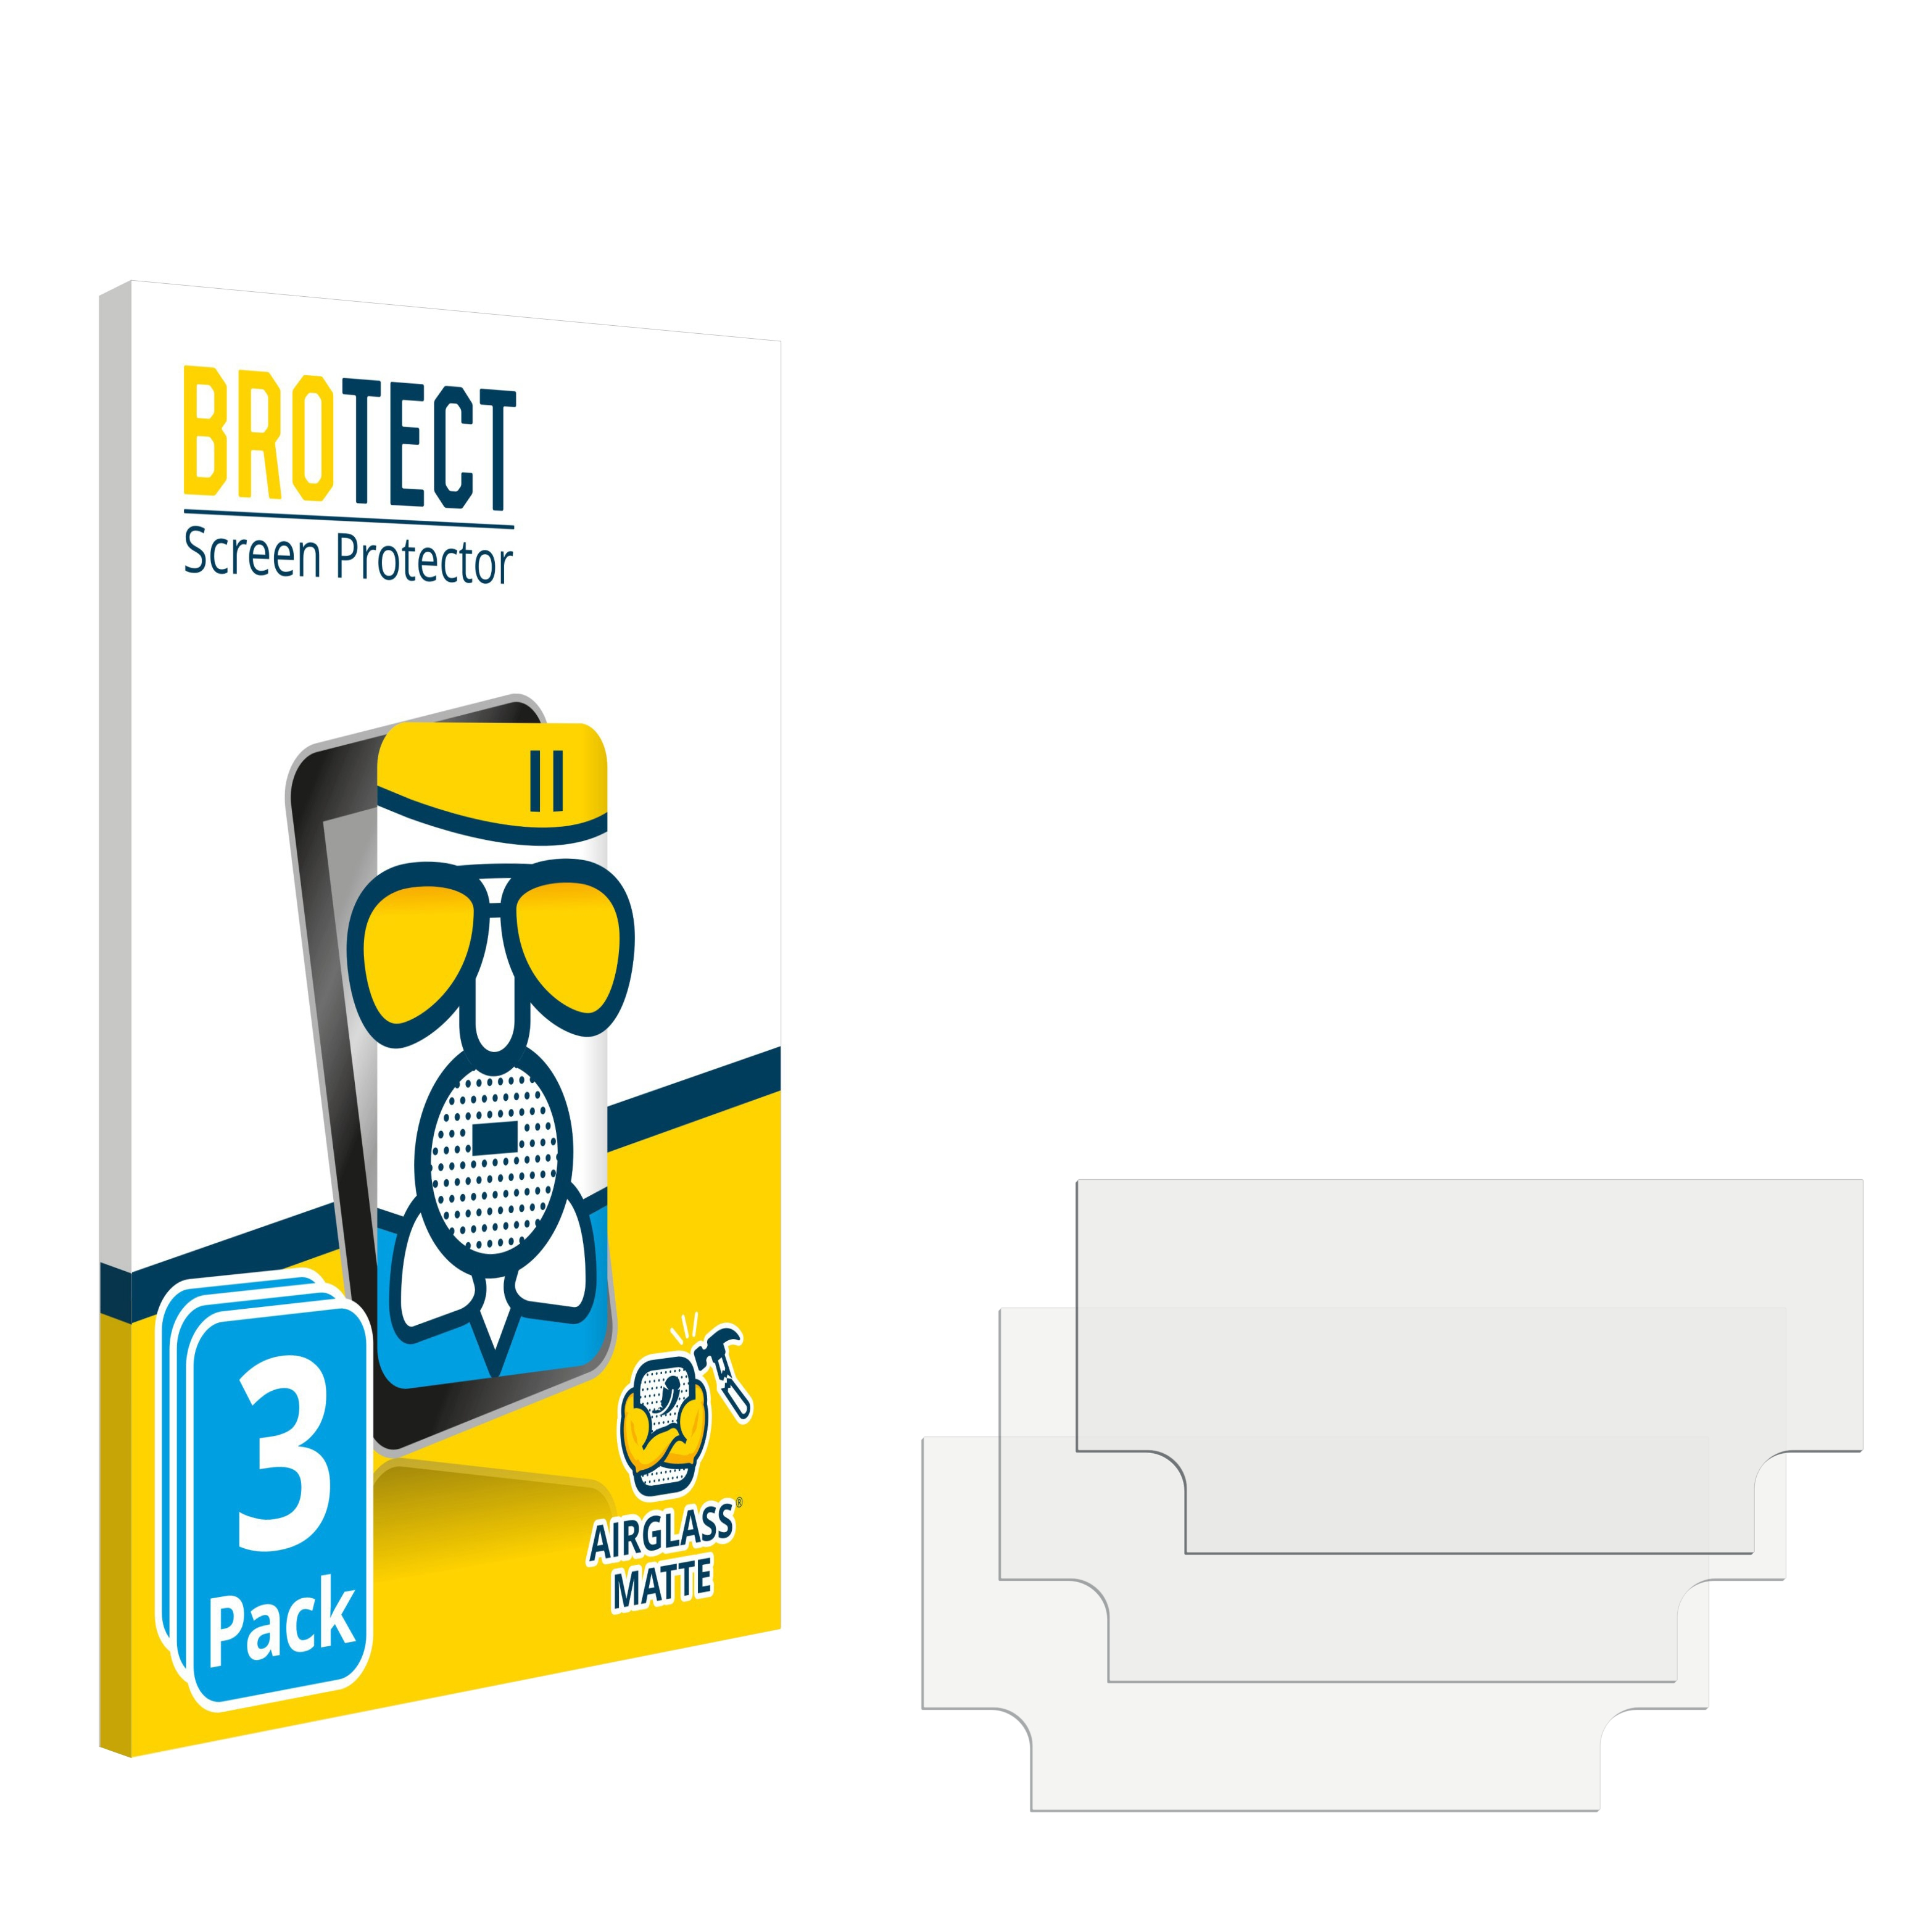 BROTECT 3x Airglass matte System Media 6.5\